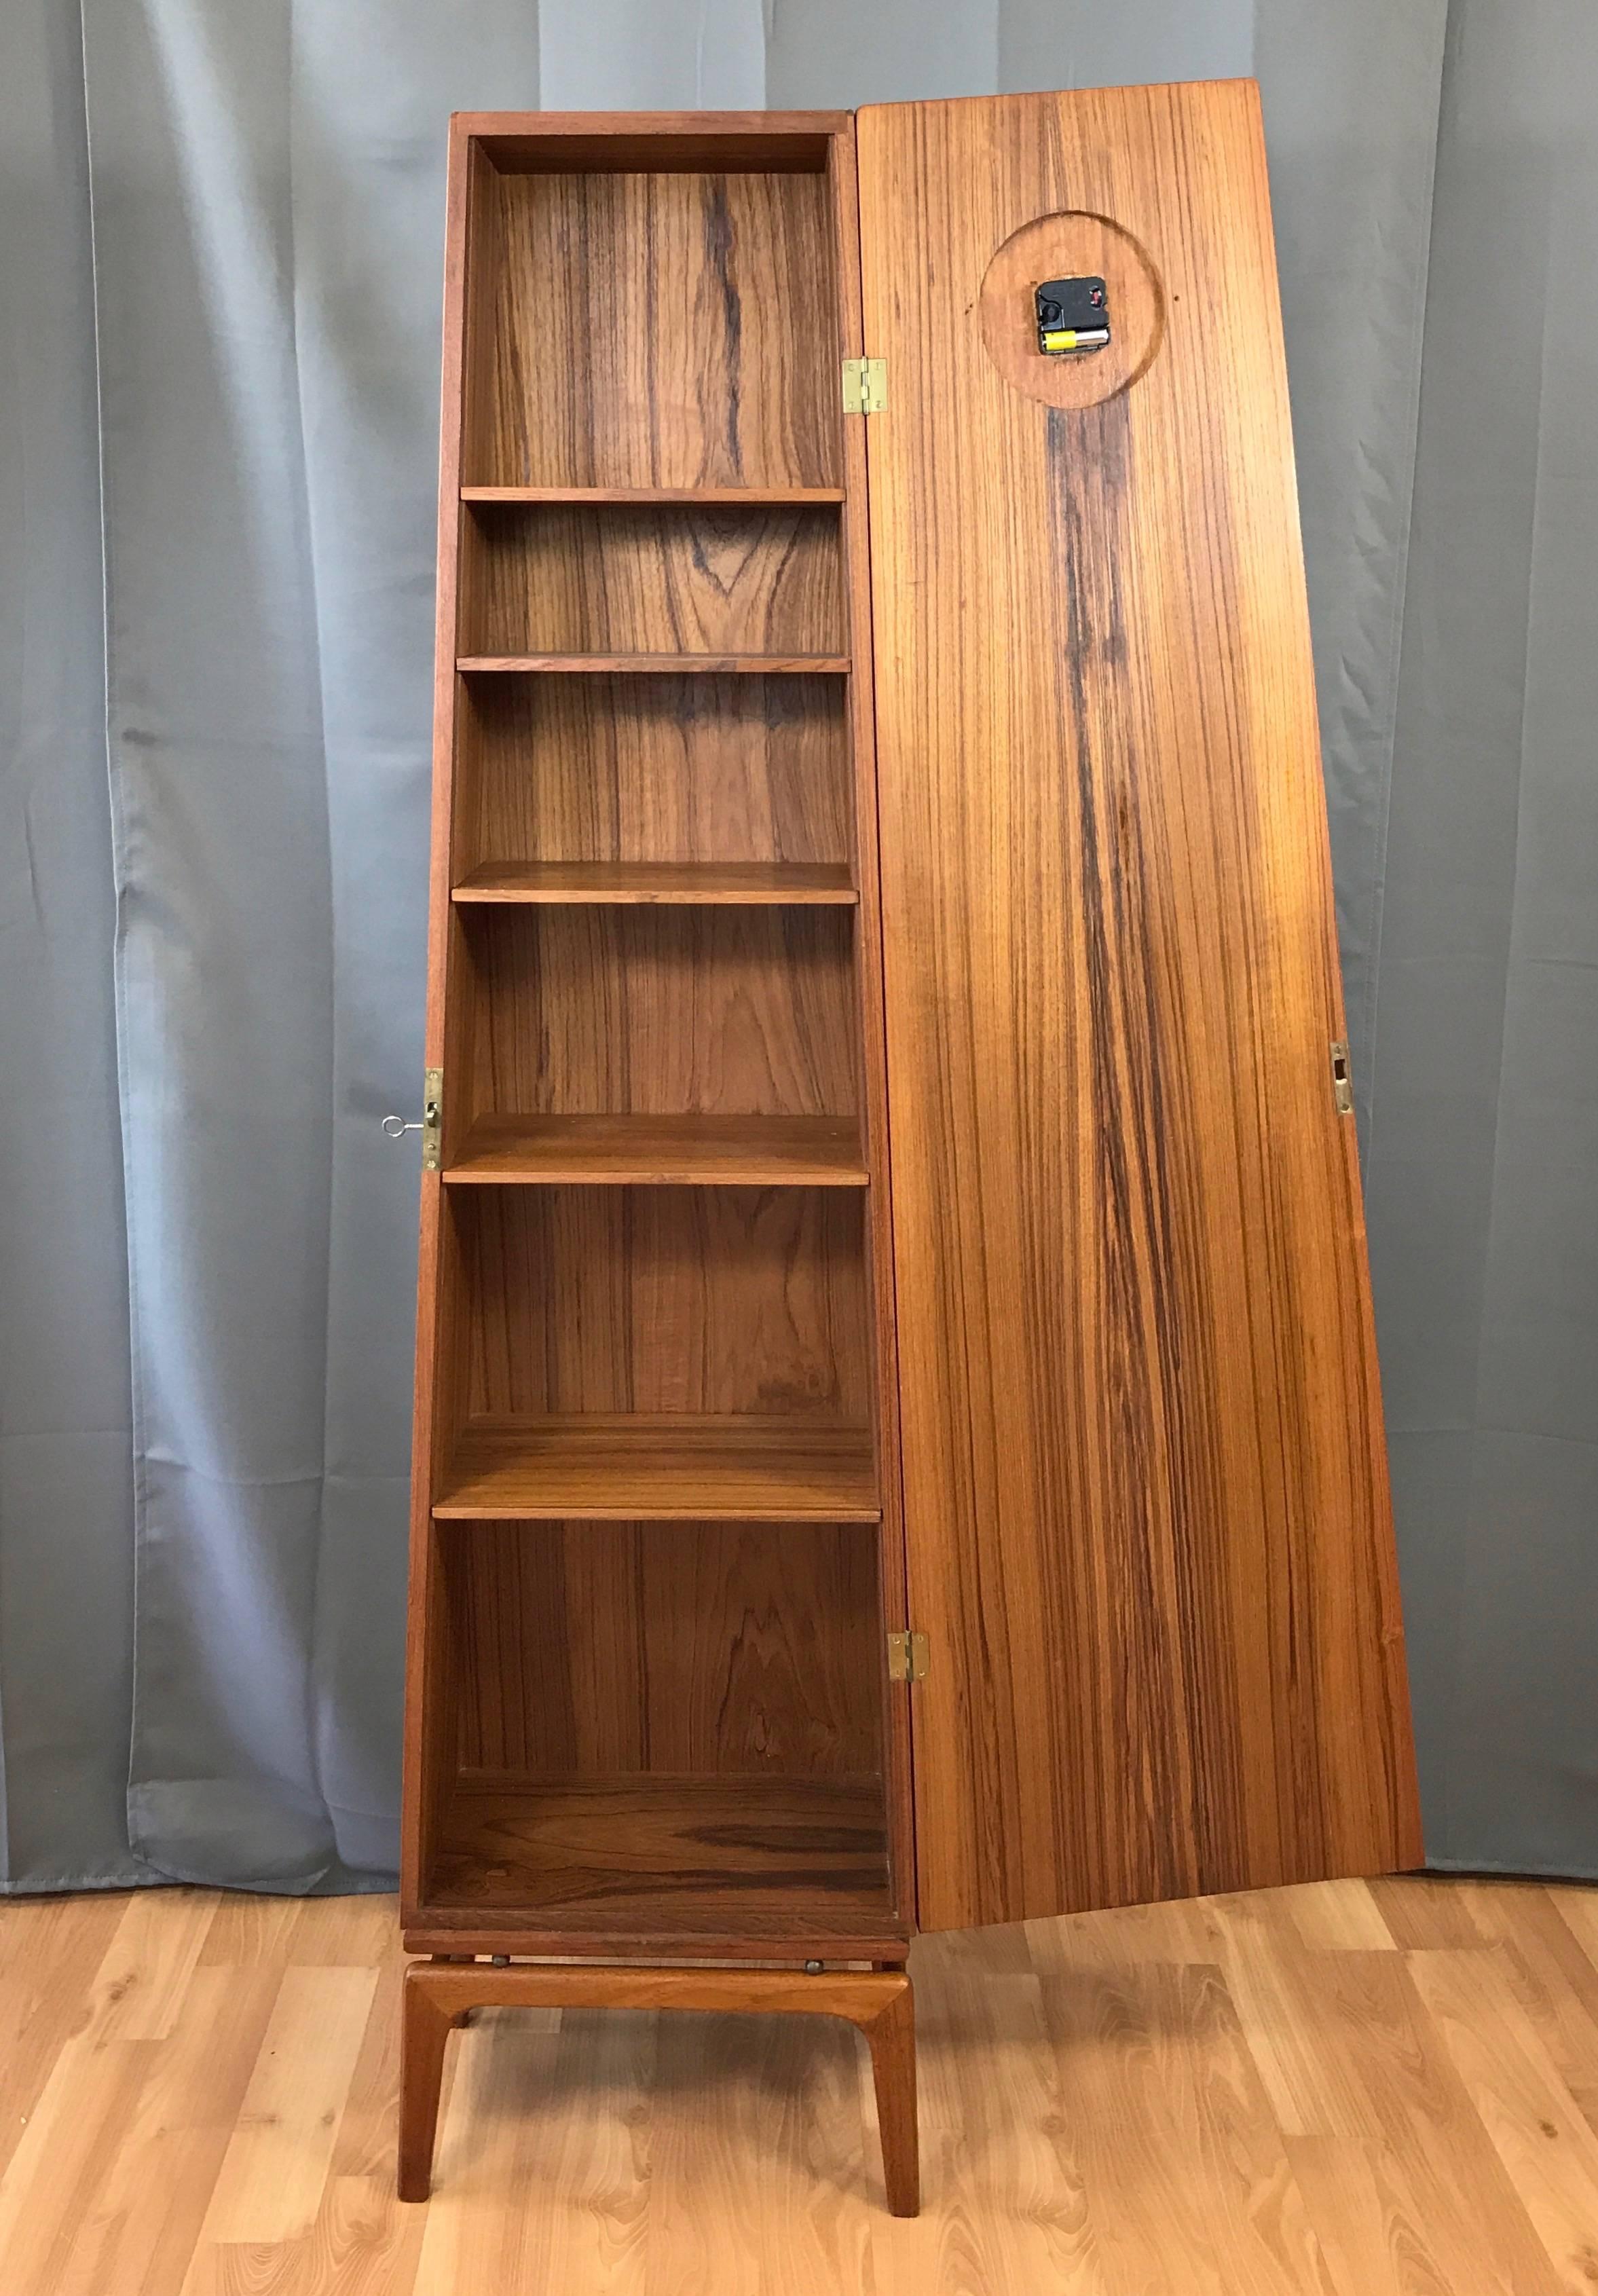 A Mid-Century Modern Danish teak grandfather clock with locking cabinet. 

Obelisk-shaped cabinet is finished inside and out in nicely figured bookmatched teak veneer. Brass ball spacers give it the appearance of floating above a sculptural solid